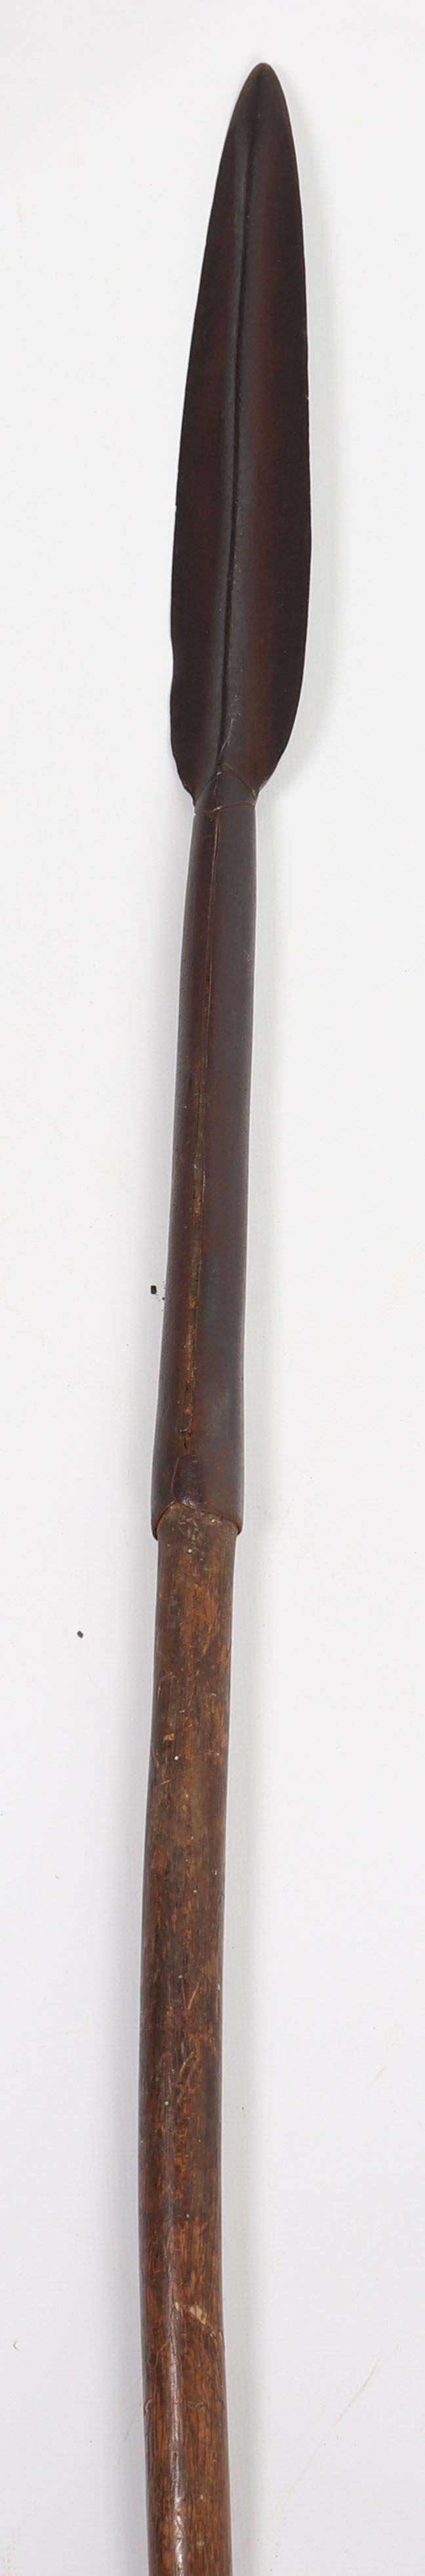 Almost Matched Pair of Sudanese Spears c.1880 - Image 16 of 18